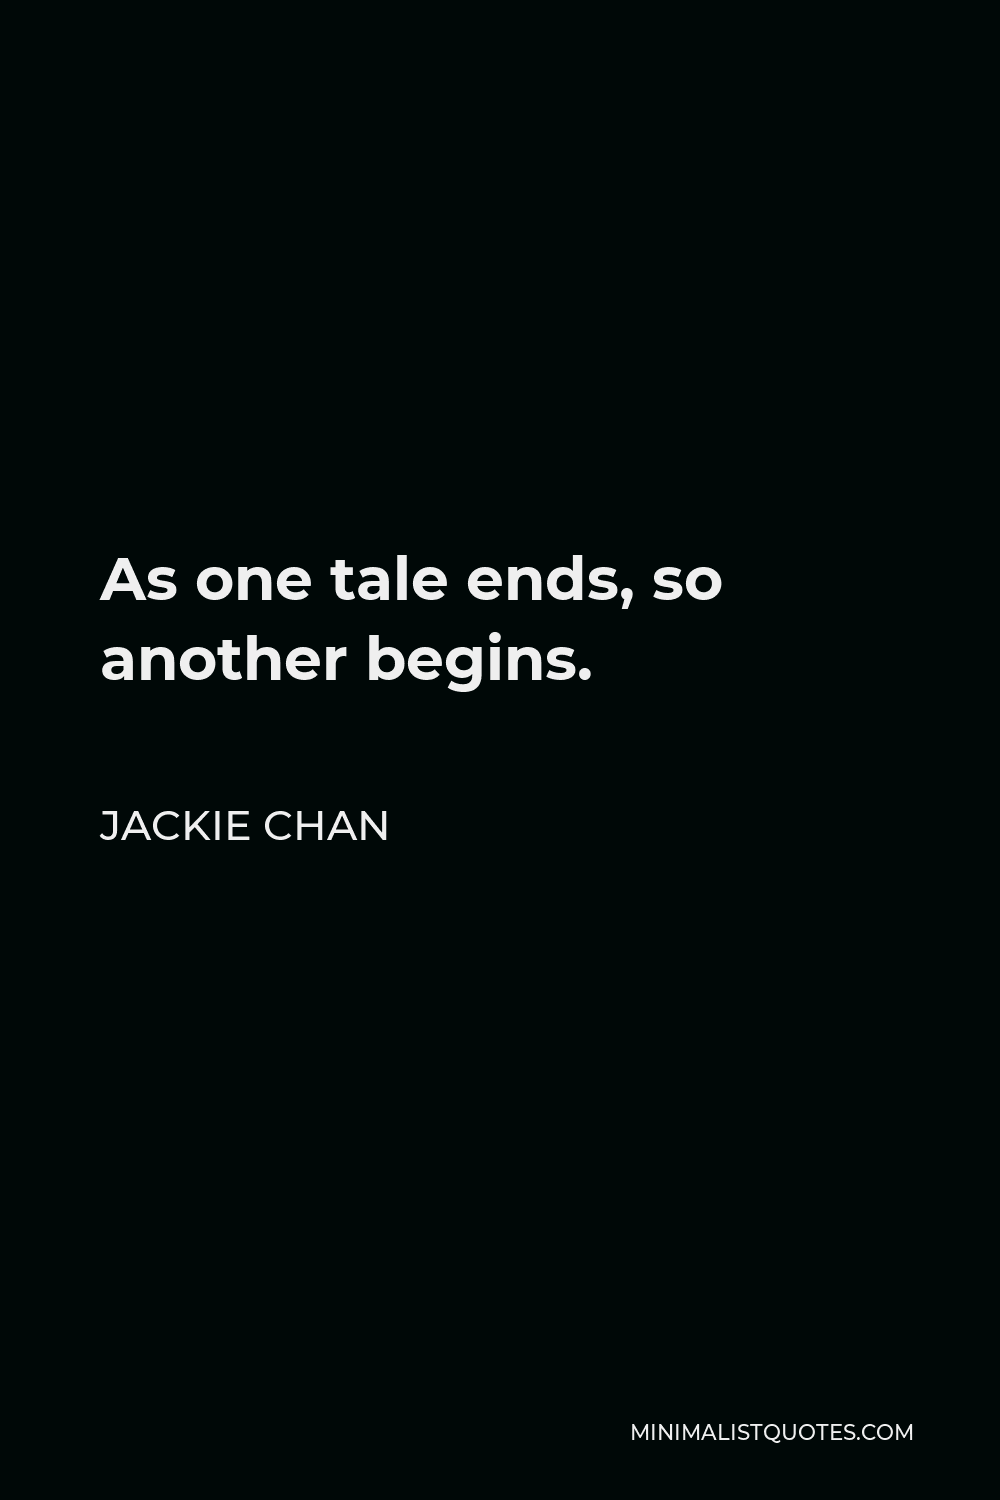 Jackie Chan Quote - As one tale ends, so another begins.